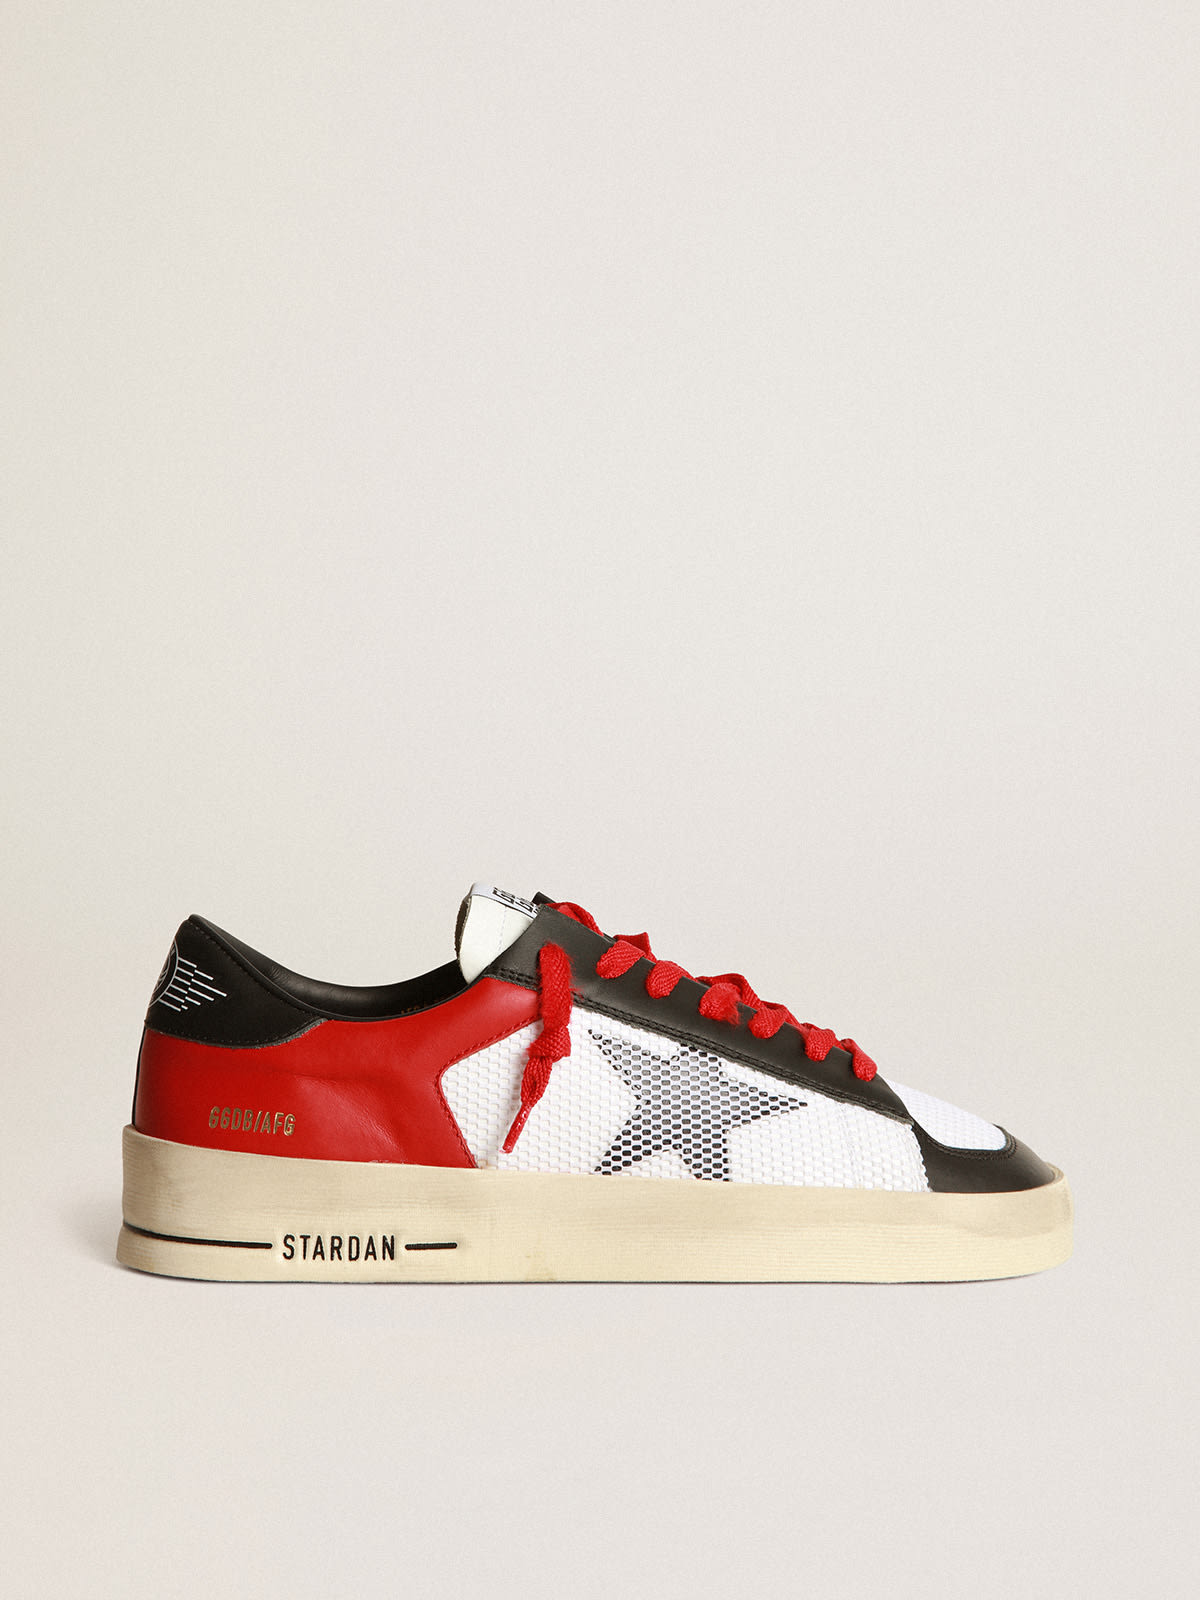 Golden Goose - Stardan sneakers in red and white leather with mesh inserts in 